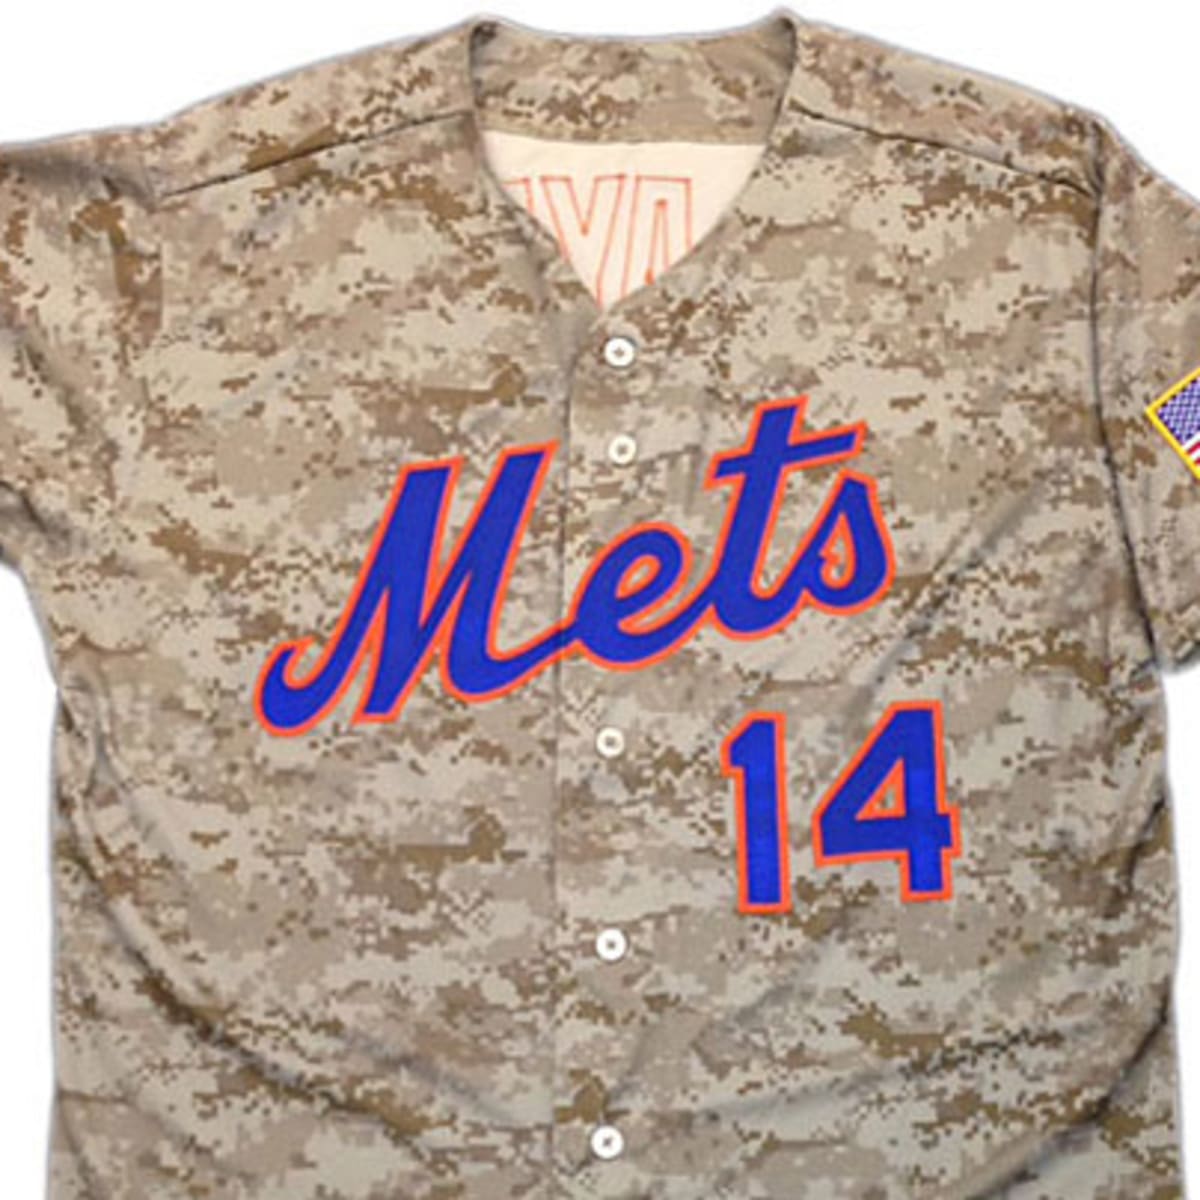 Mets Baseball Jersey Lighthearted Camo Personalized Mets Gifts -  Personalized Gifts: Family, Sports, Occasions, Trending